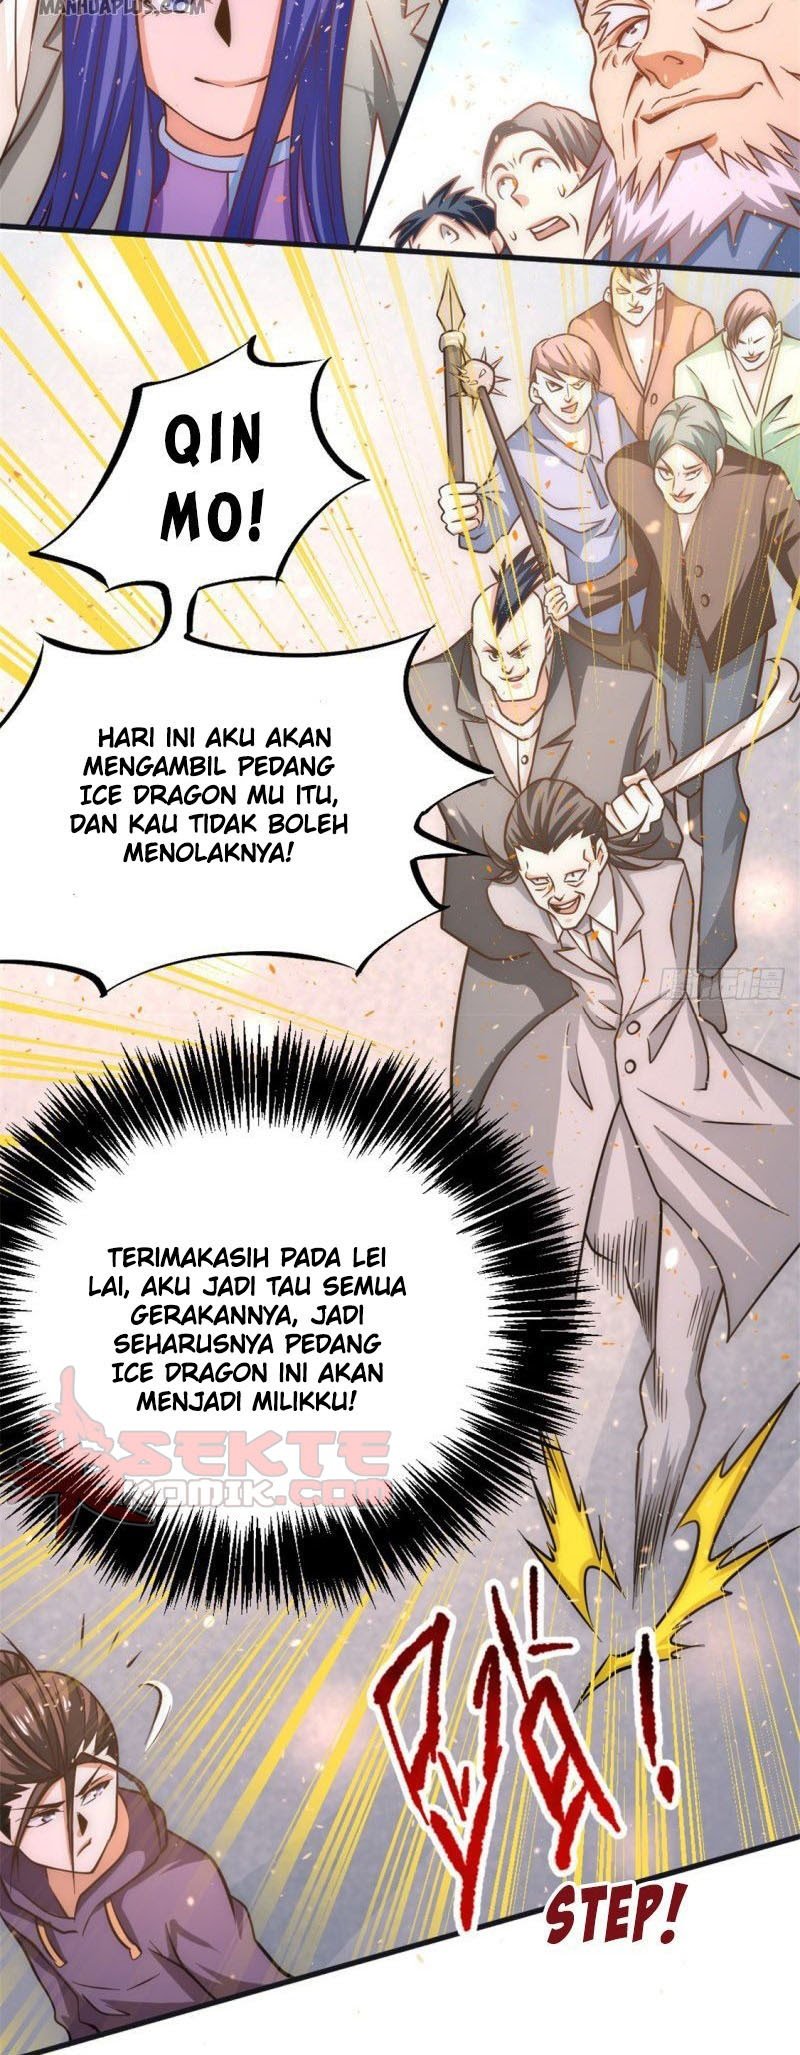 Almighty Master Chapter 57